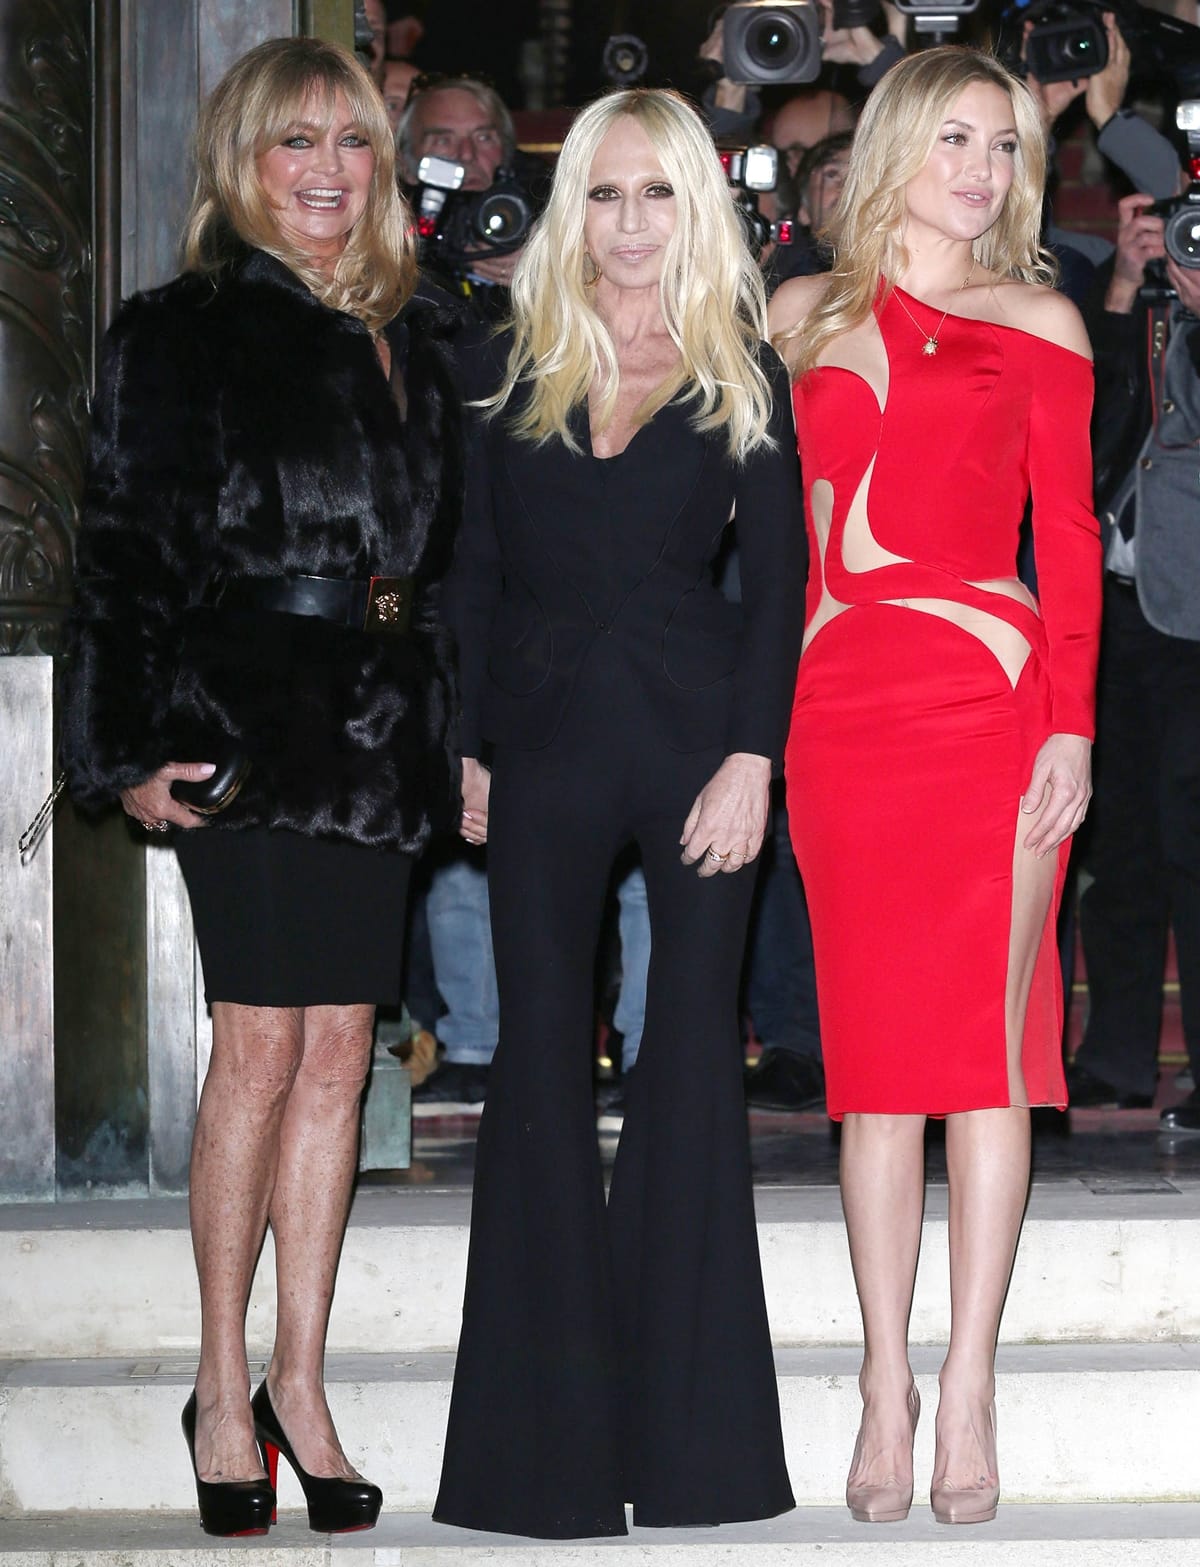 Kate Hudson was accompanied by Donatella Versace, who looked effortlessly chic in a slim-fit suit that perfectly accentuated her figure, and Goldie Hawn, who opted for a black long-sleeved cocktail dress from the Versace Resort 2015 collection